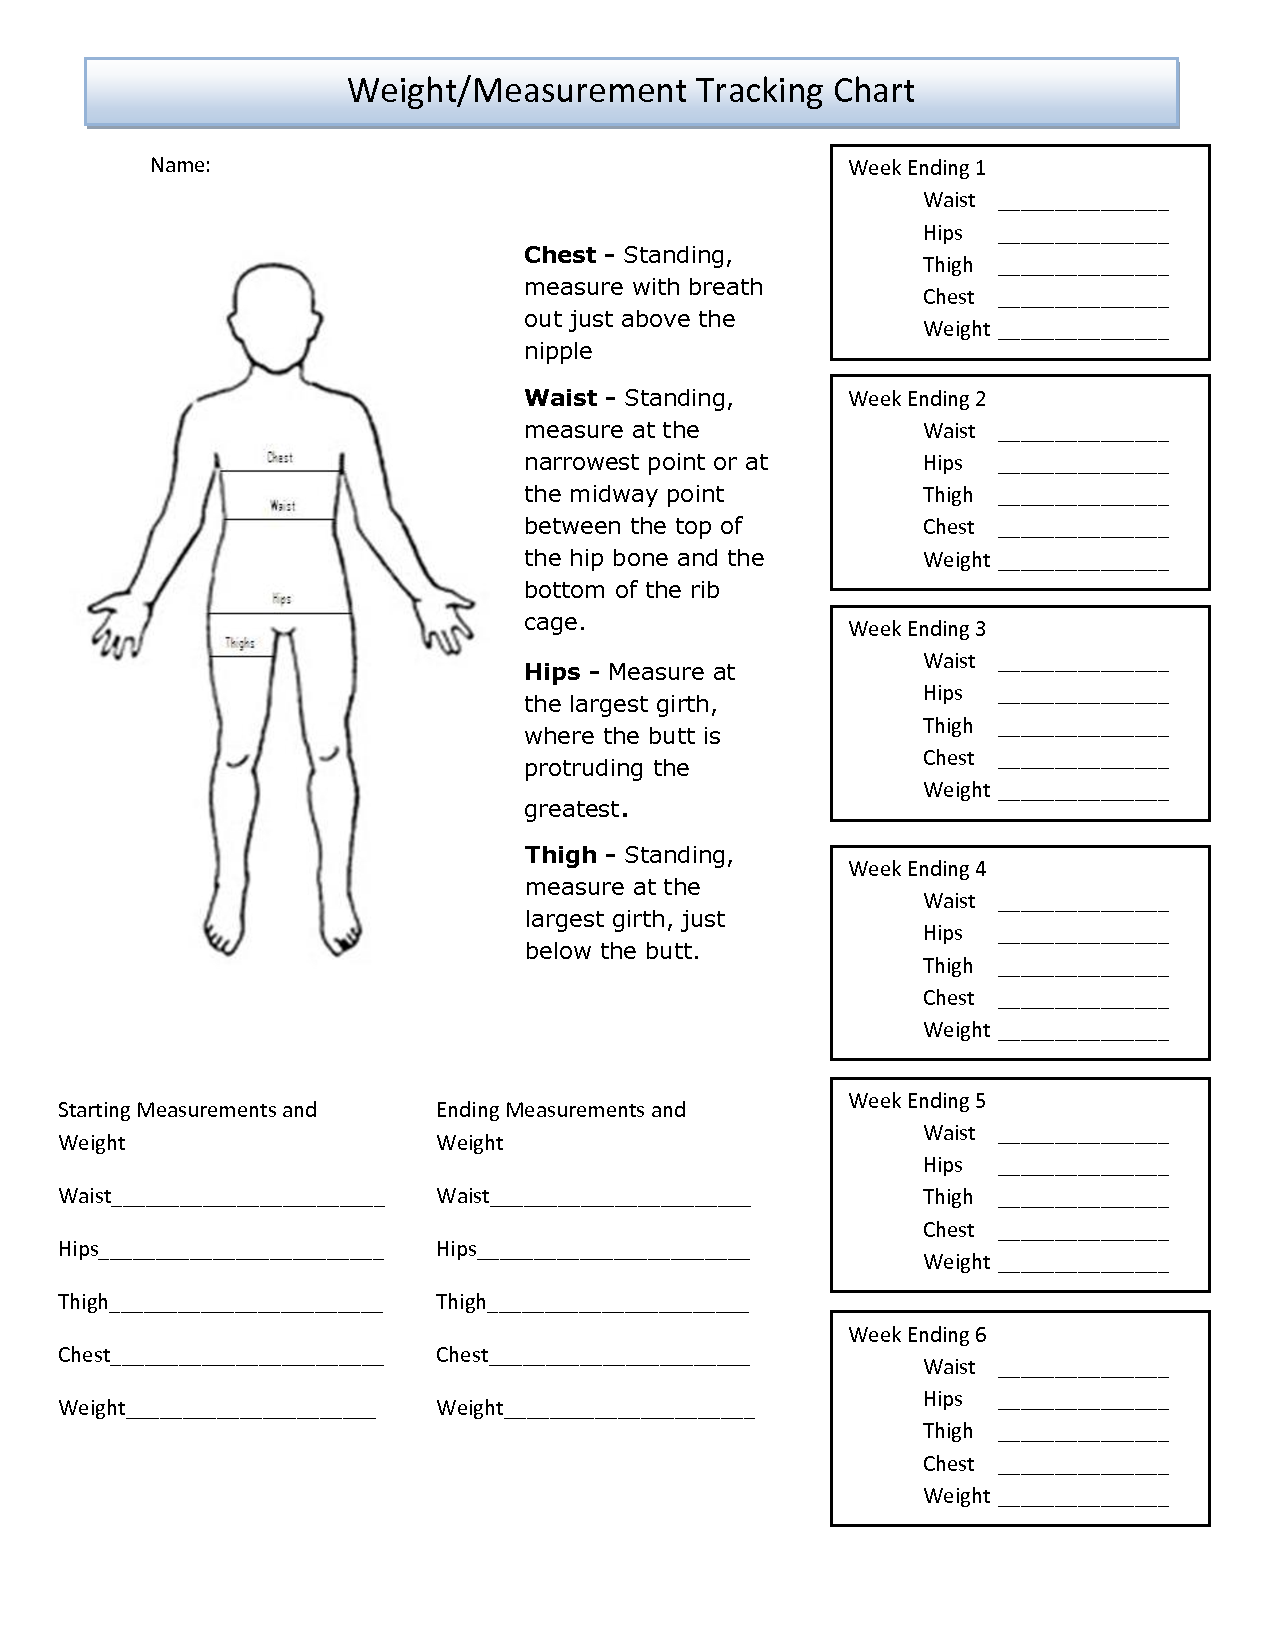 This printable chart is to be used for tracking weight and body 